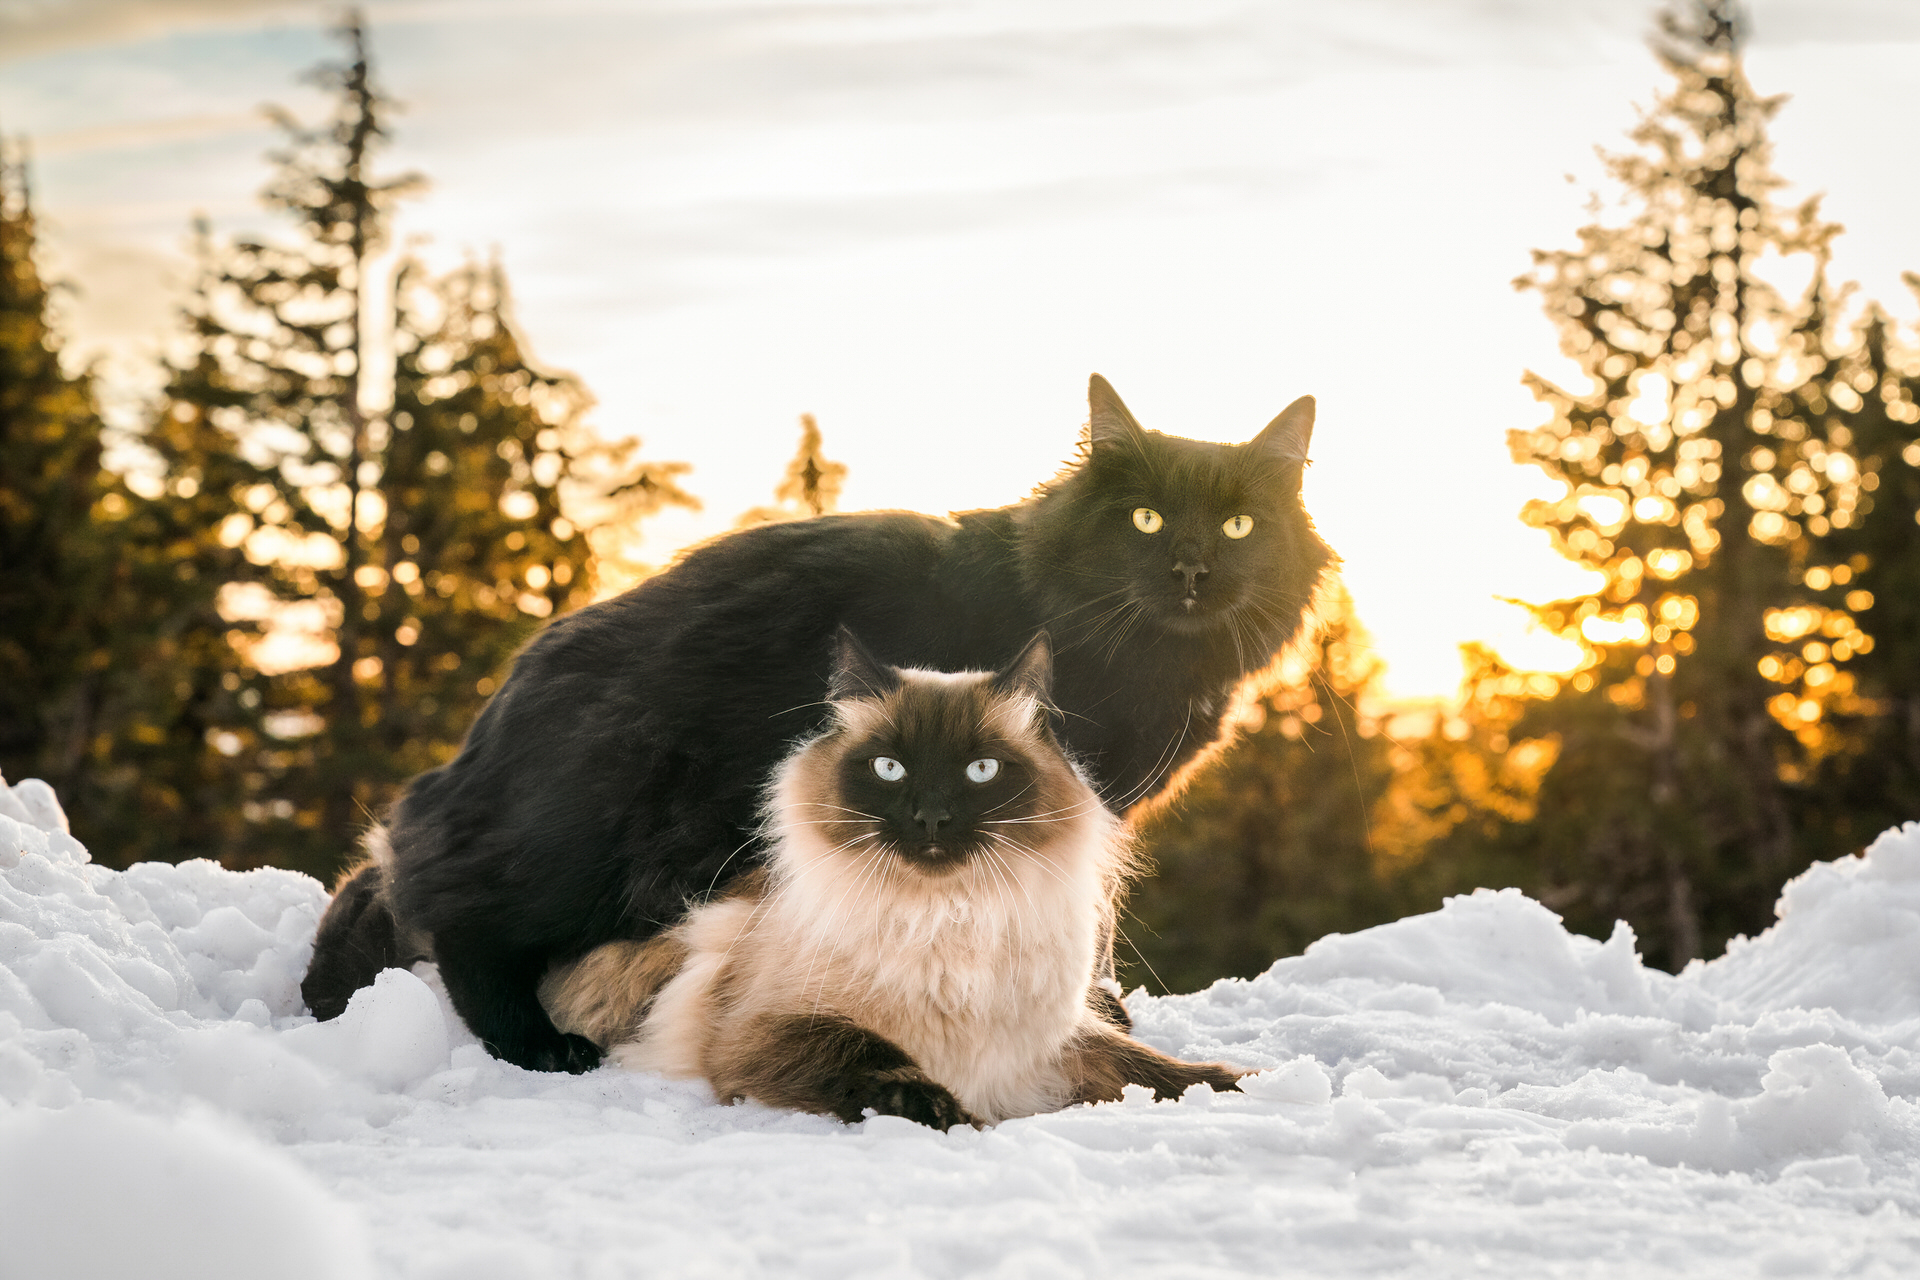 cat brothers standing together in the snow